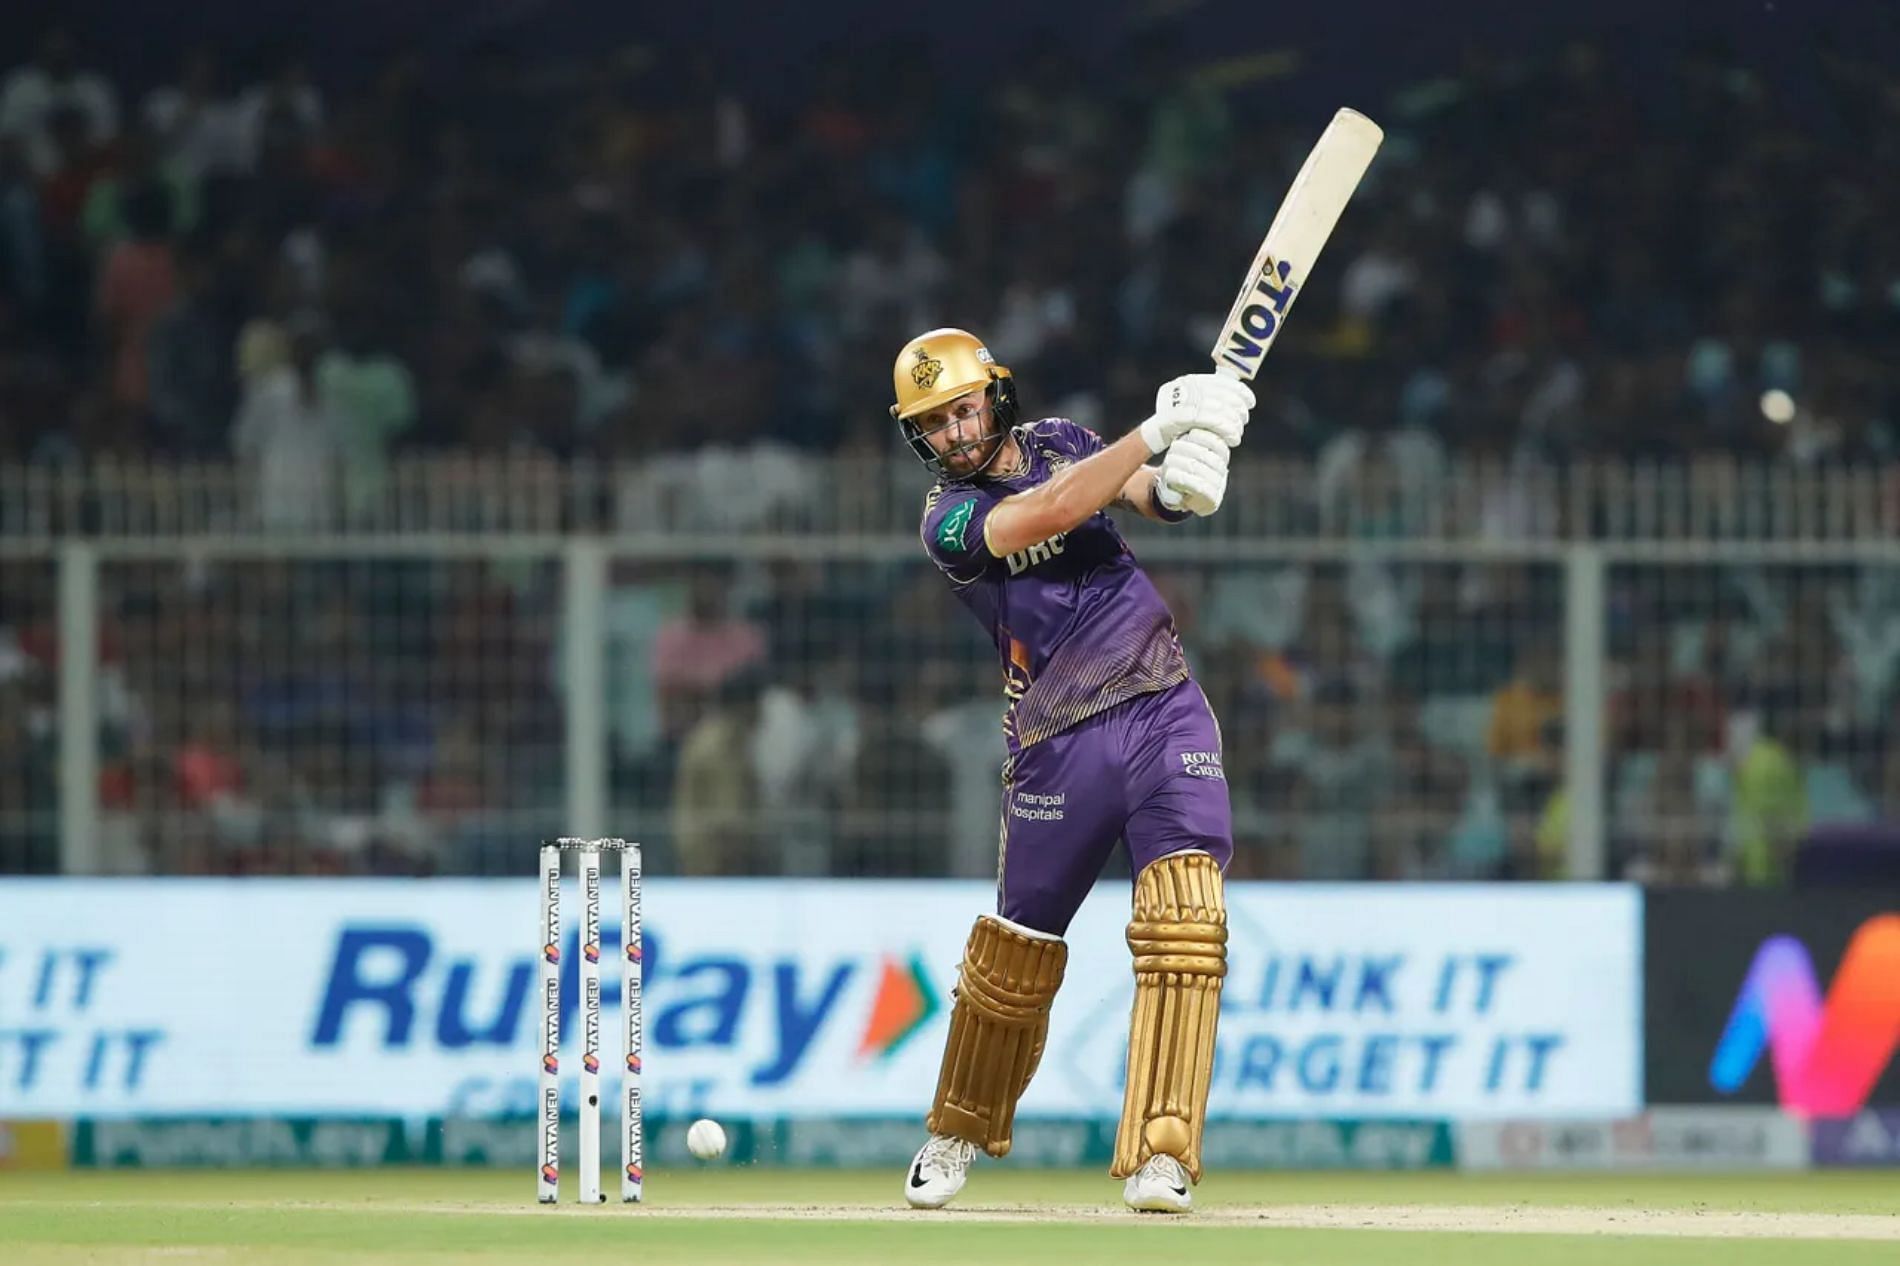 Phil Salt has been spectacular at the top of the order for KKR. (Pic: BCCI/ iplt20.com)